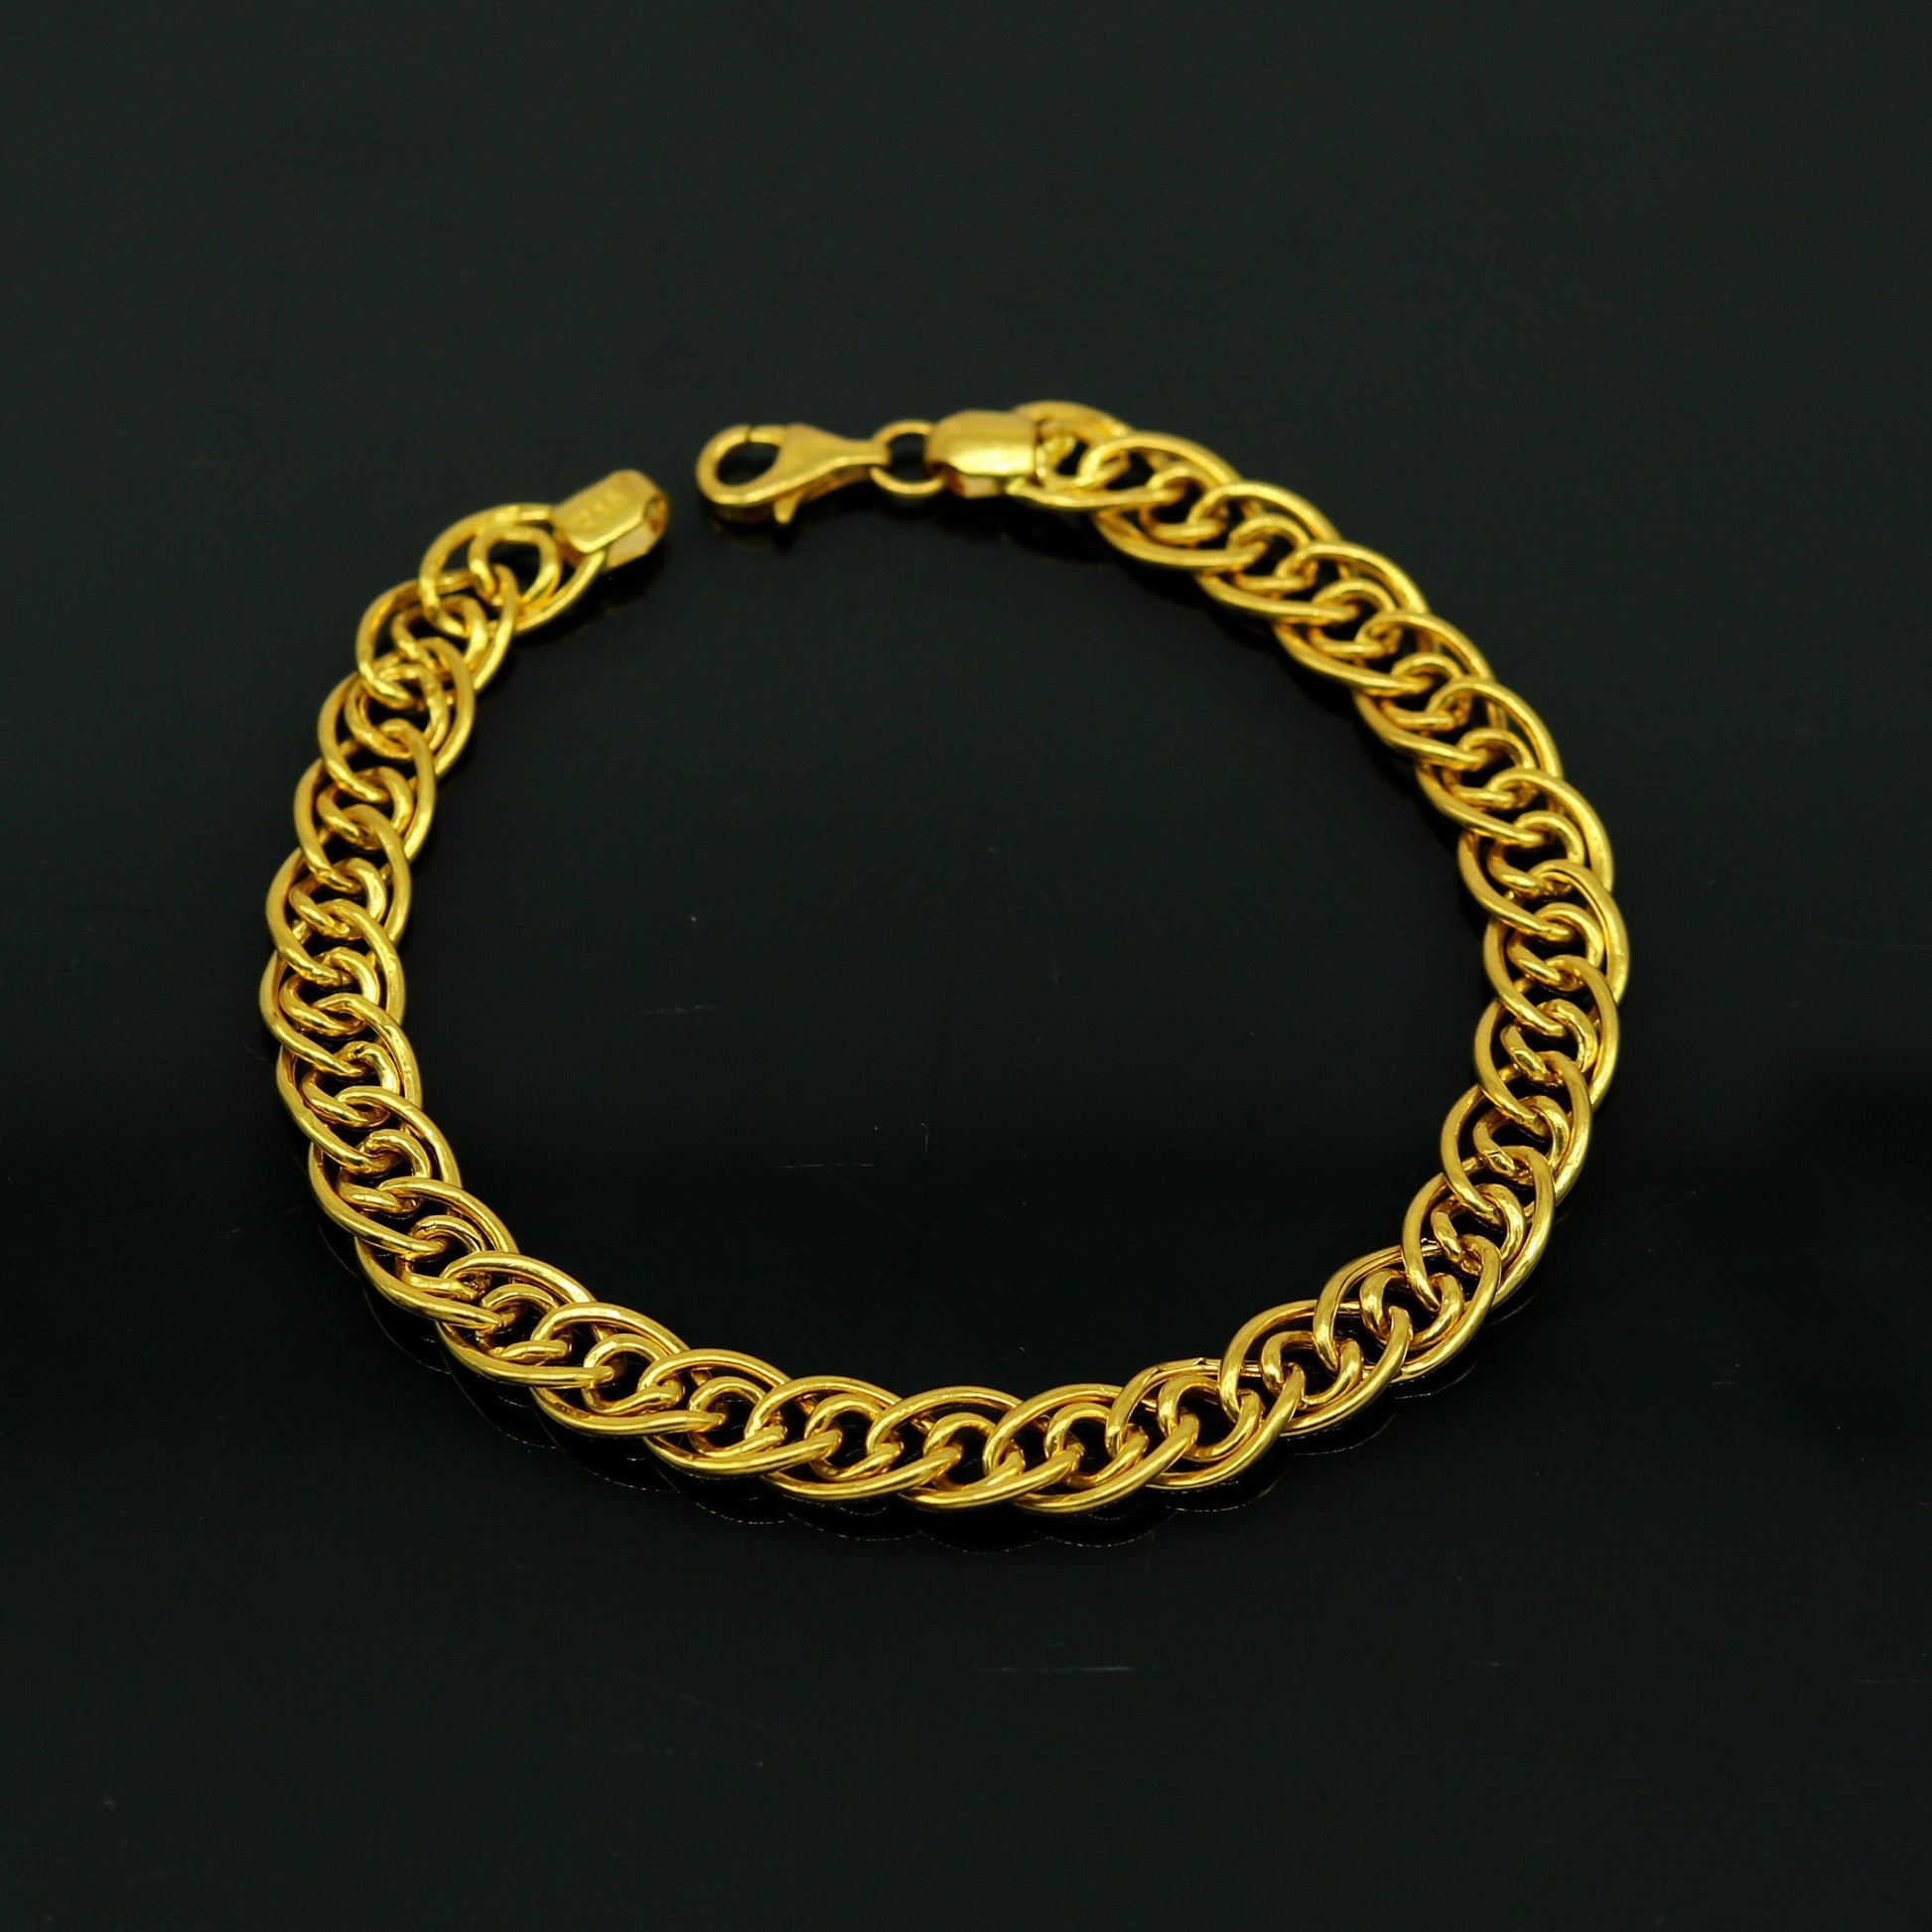 Exclusive 22kt yellow gold custom stylish double link chain design flexible bracelet, best gift unisex personalized gold fancy jewelry br45 - TRIBAL ORNAMENTS